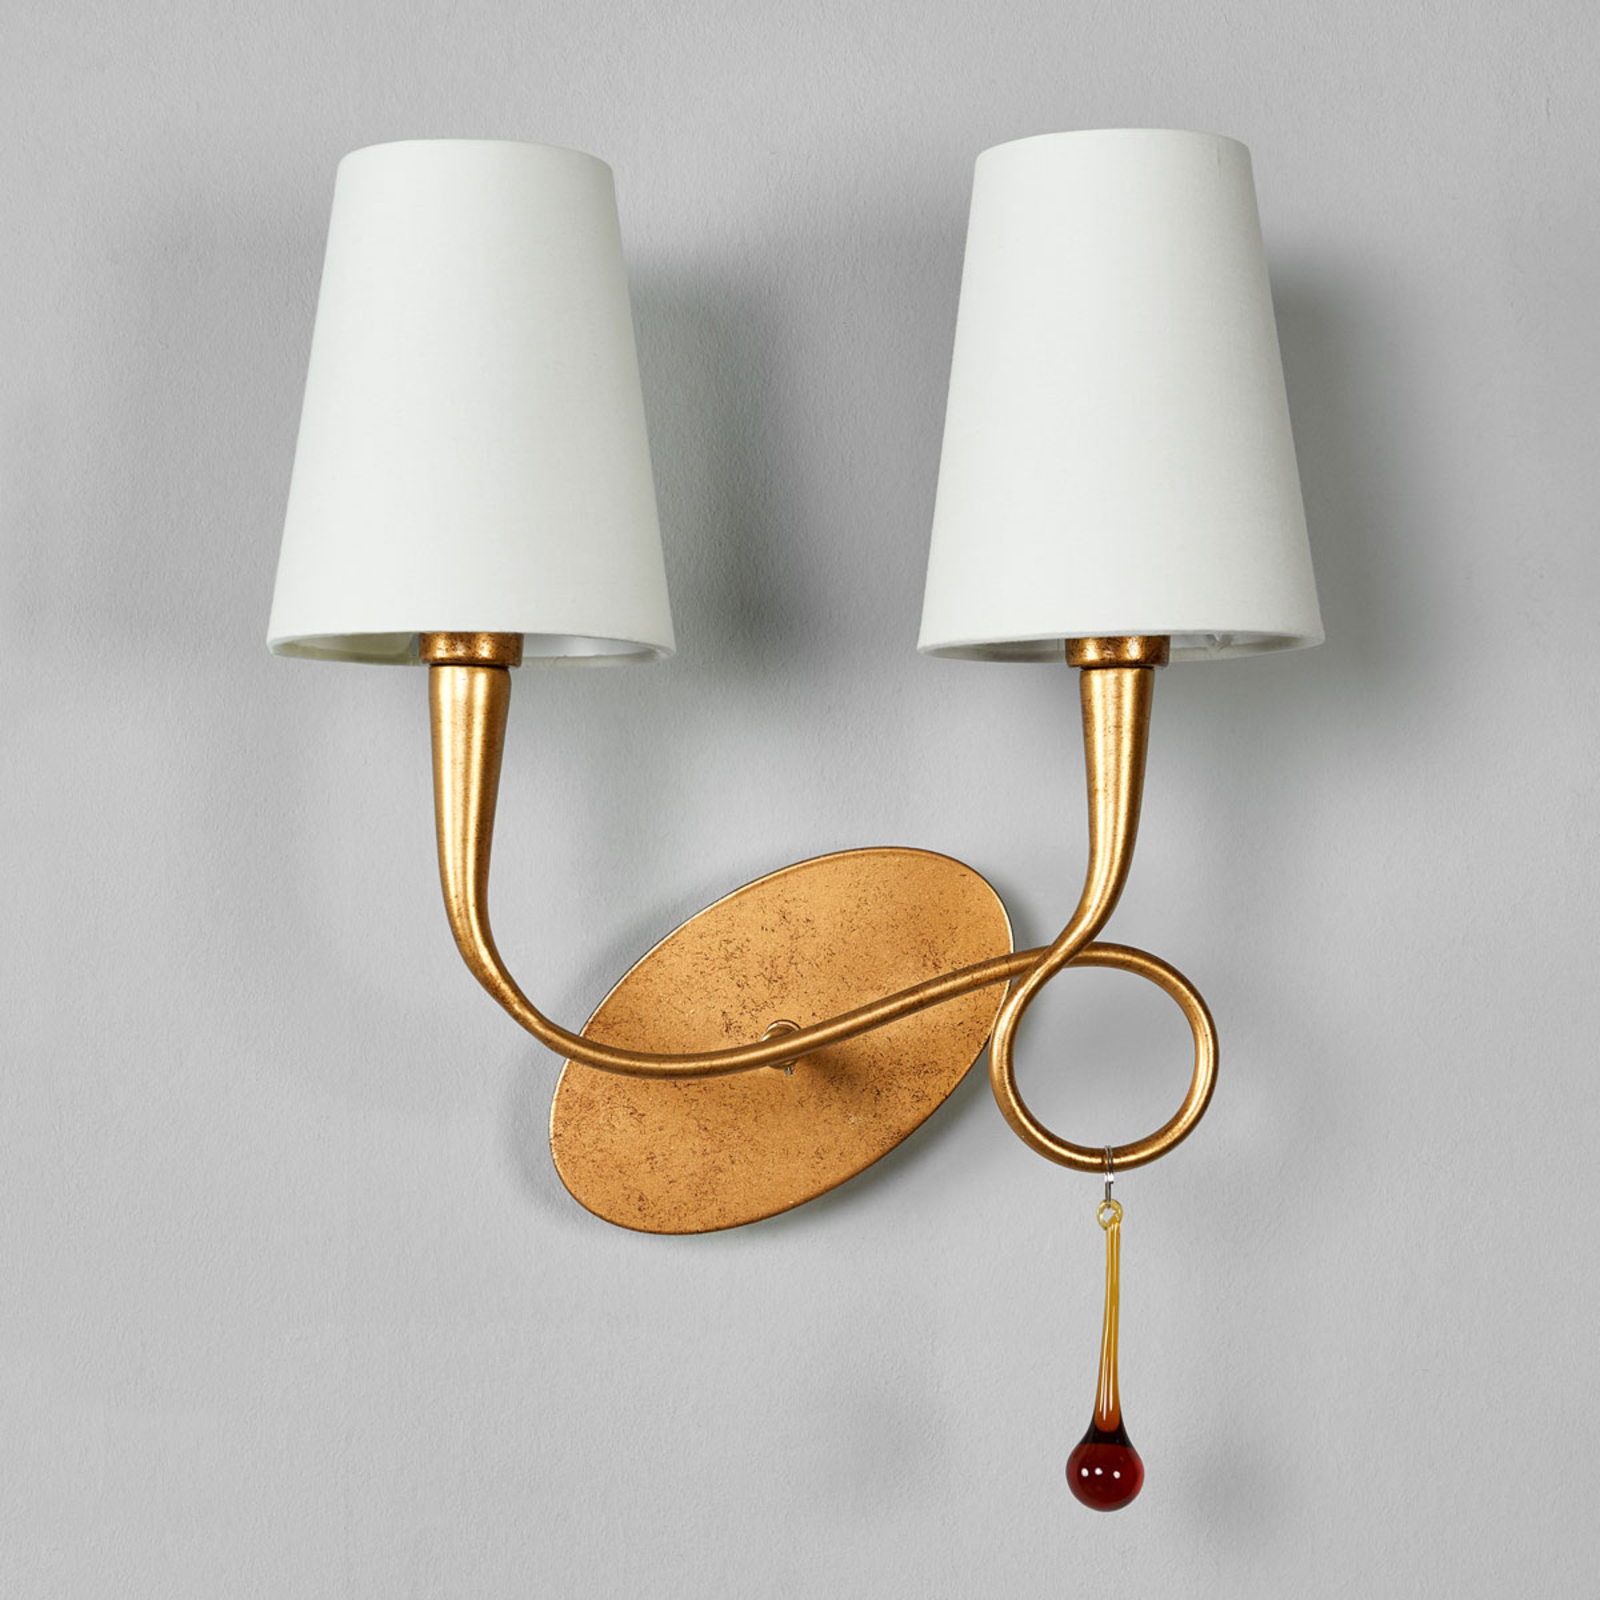 Wall light Paola 2-bulb gold with textile shades